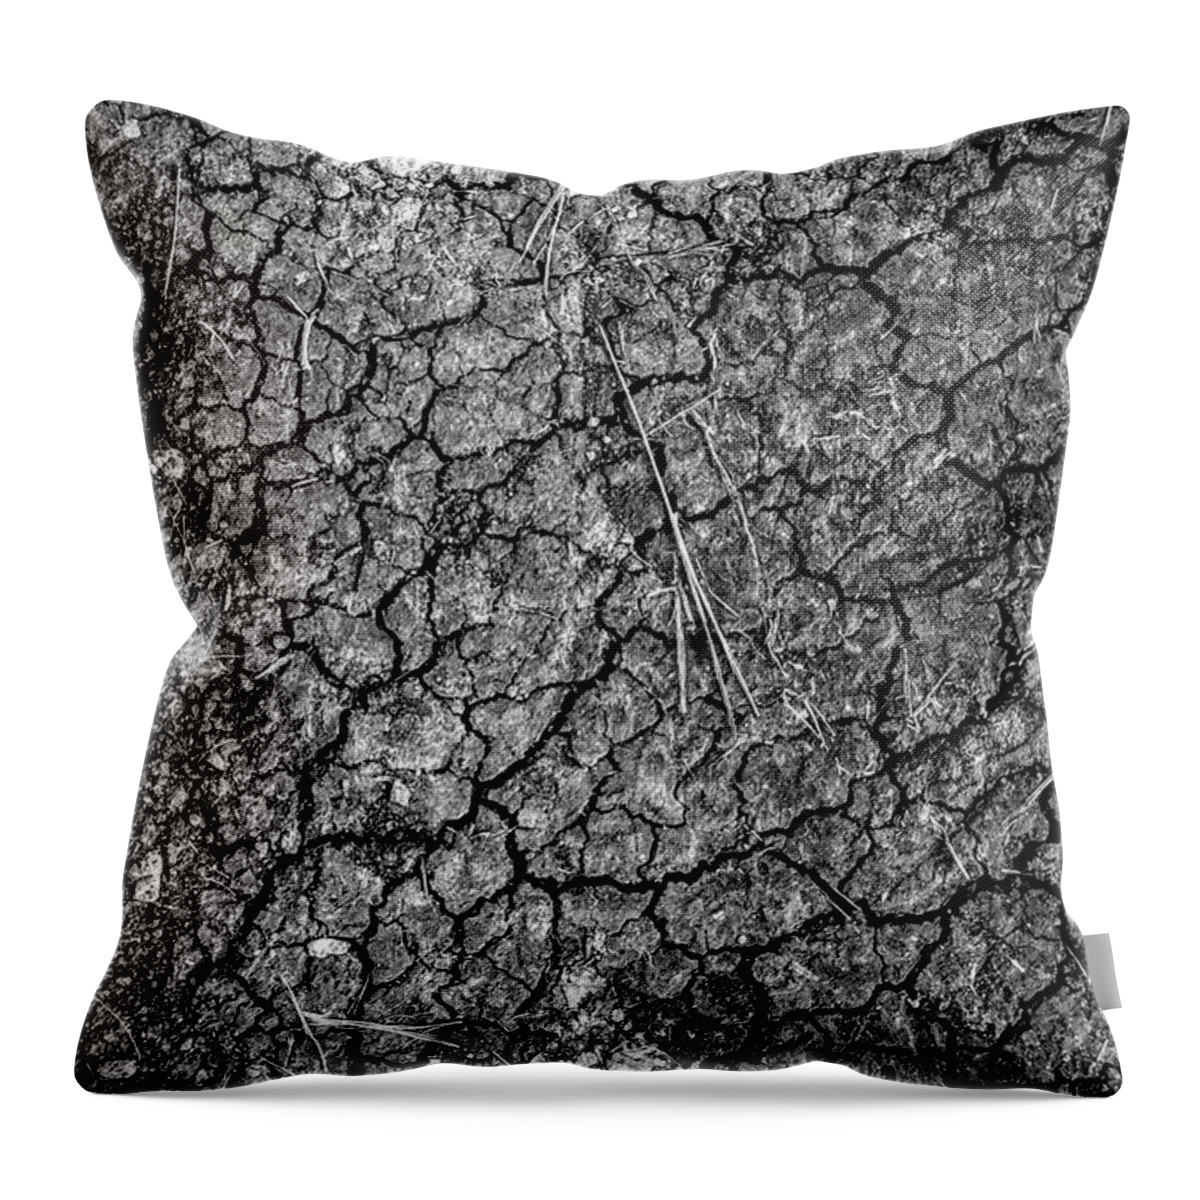 Cracked Ground Throw Pillow featuring the photograph Cracked by Michael Brungardt